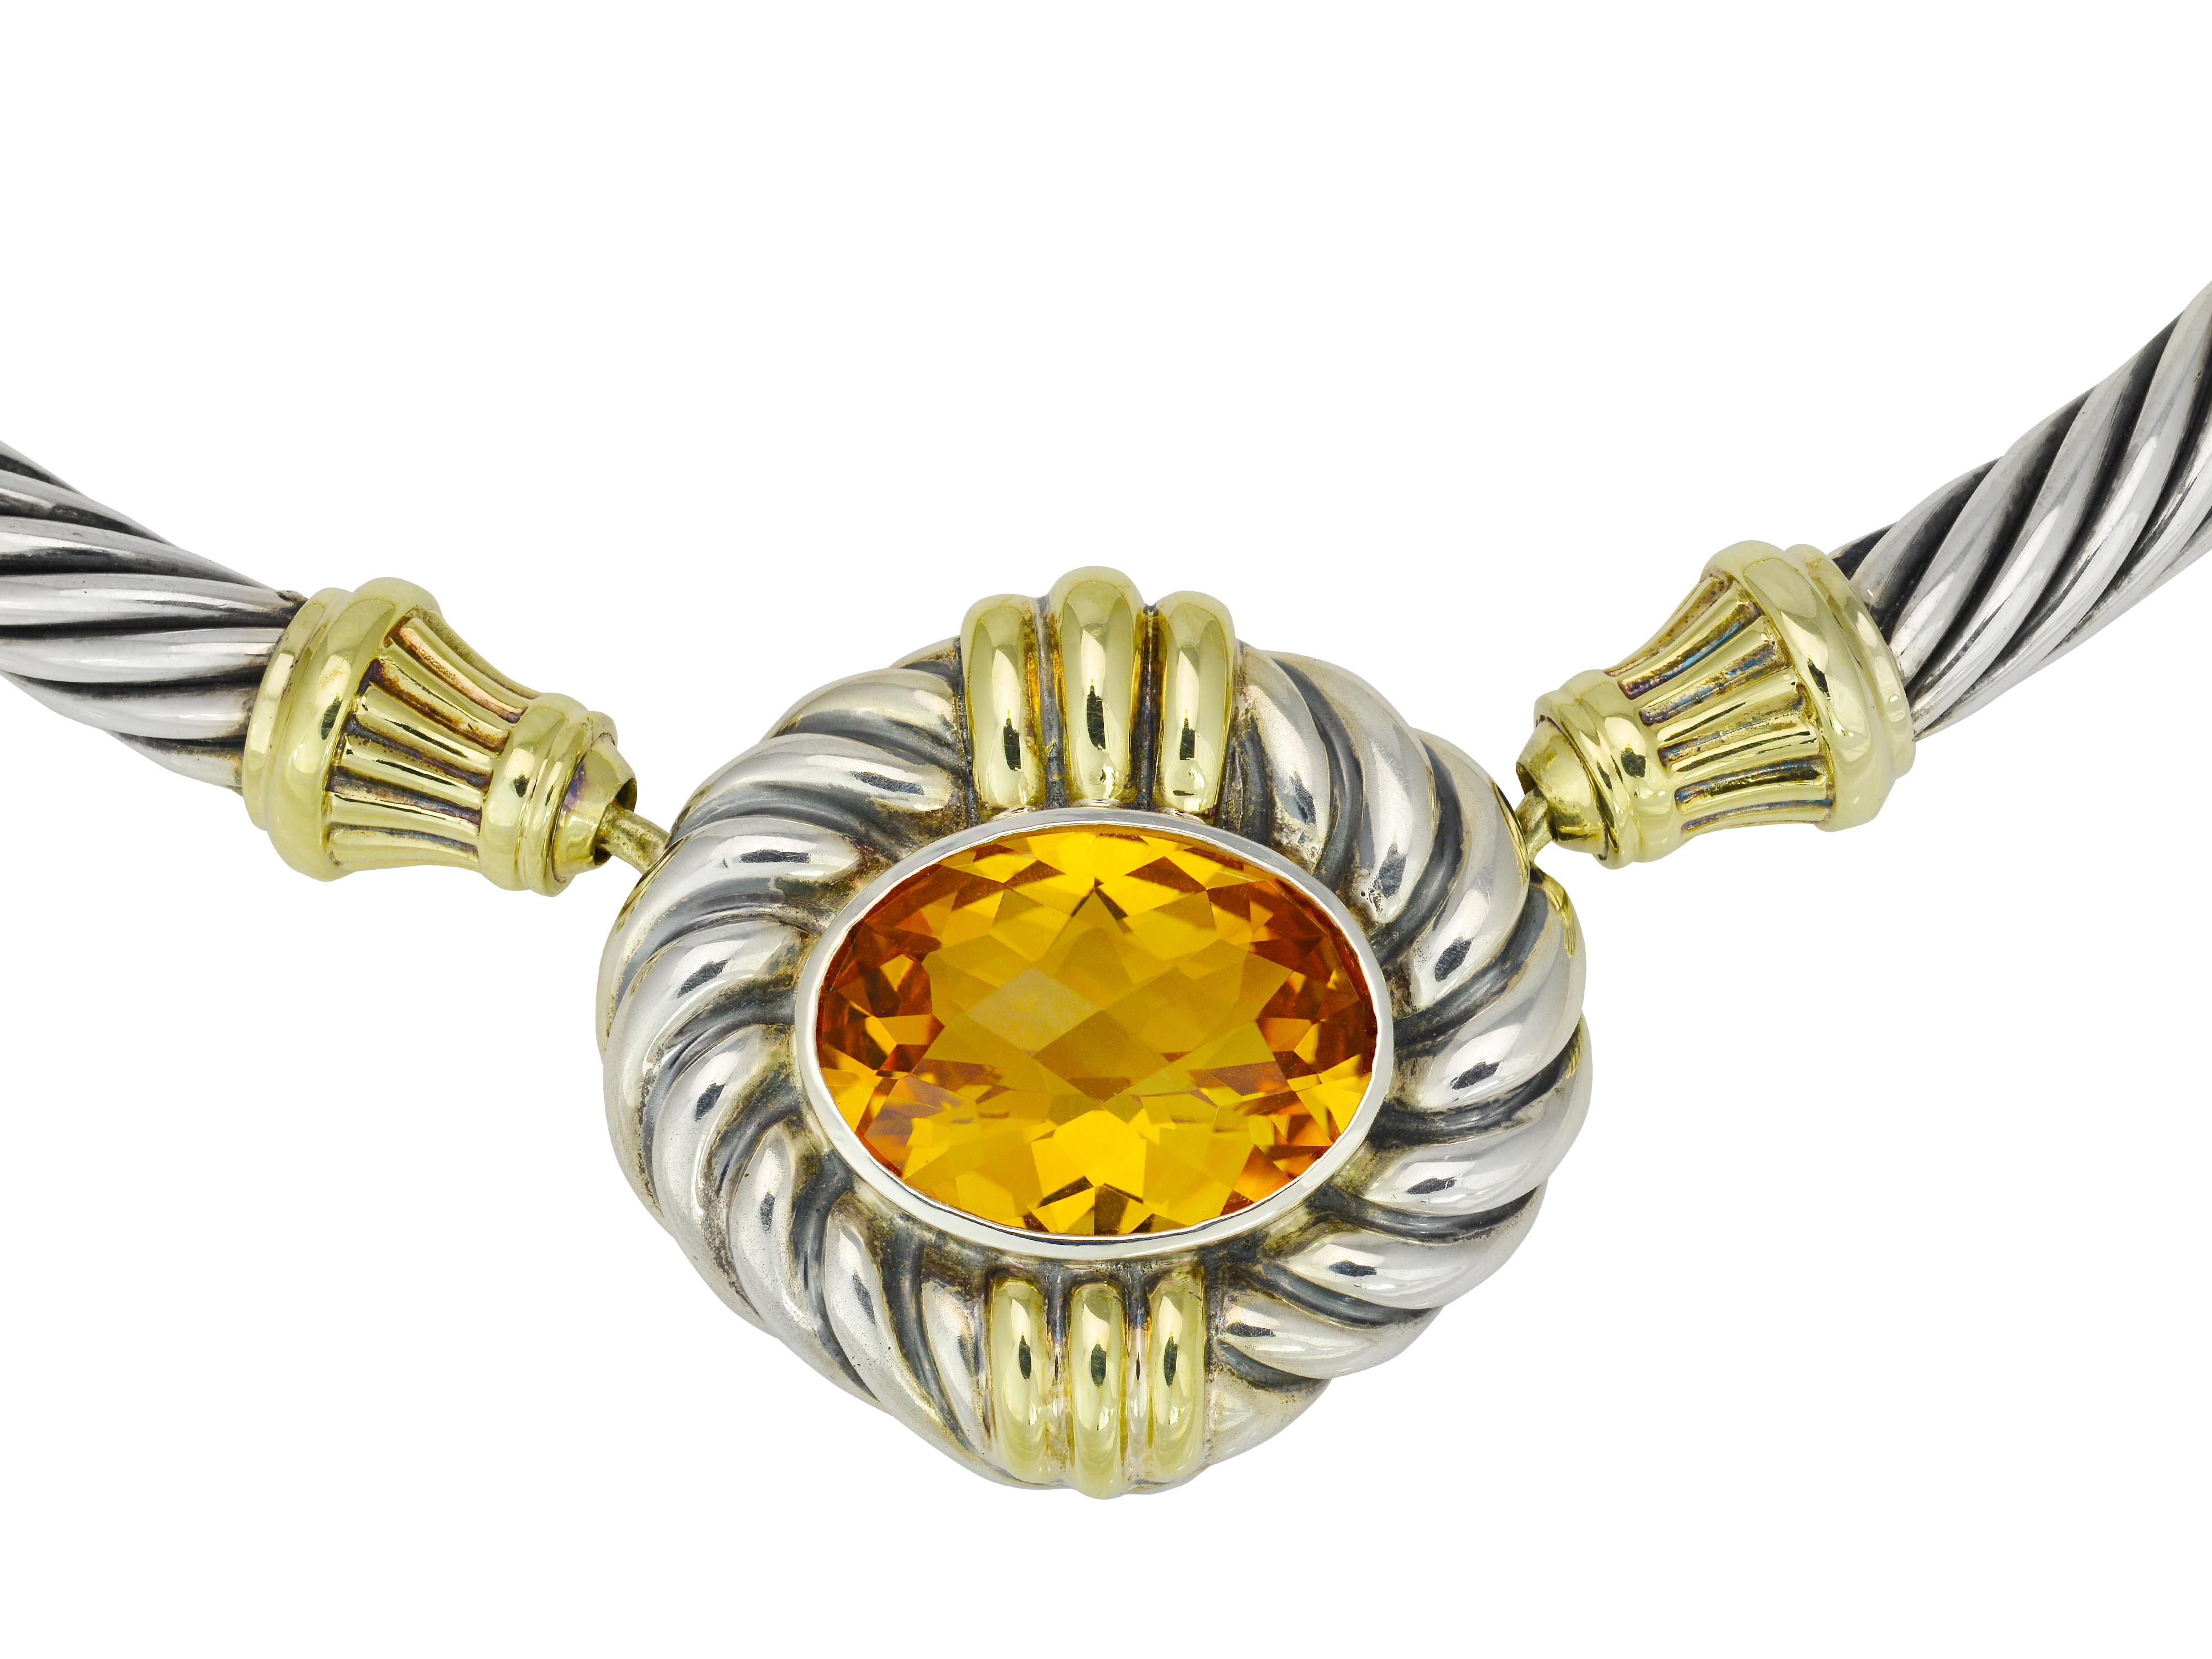 This sterling silver and 14 karat yellow gold cable necklace from David Yurman lays directly on the collar. It features a large faceted oval citrine quartz center stone in a yellow gold bezel setting. The cable necklace is articulated in 5 spots for